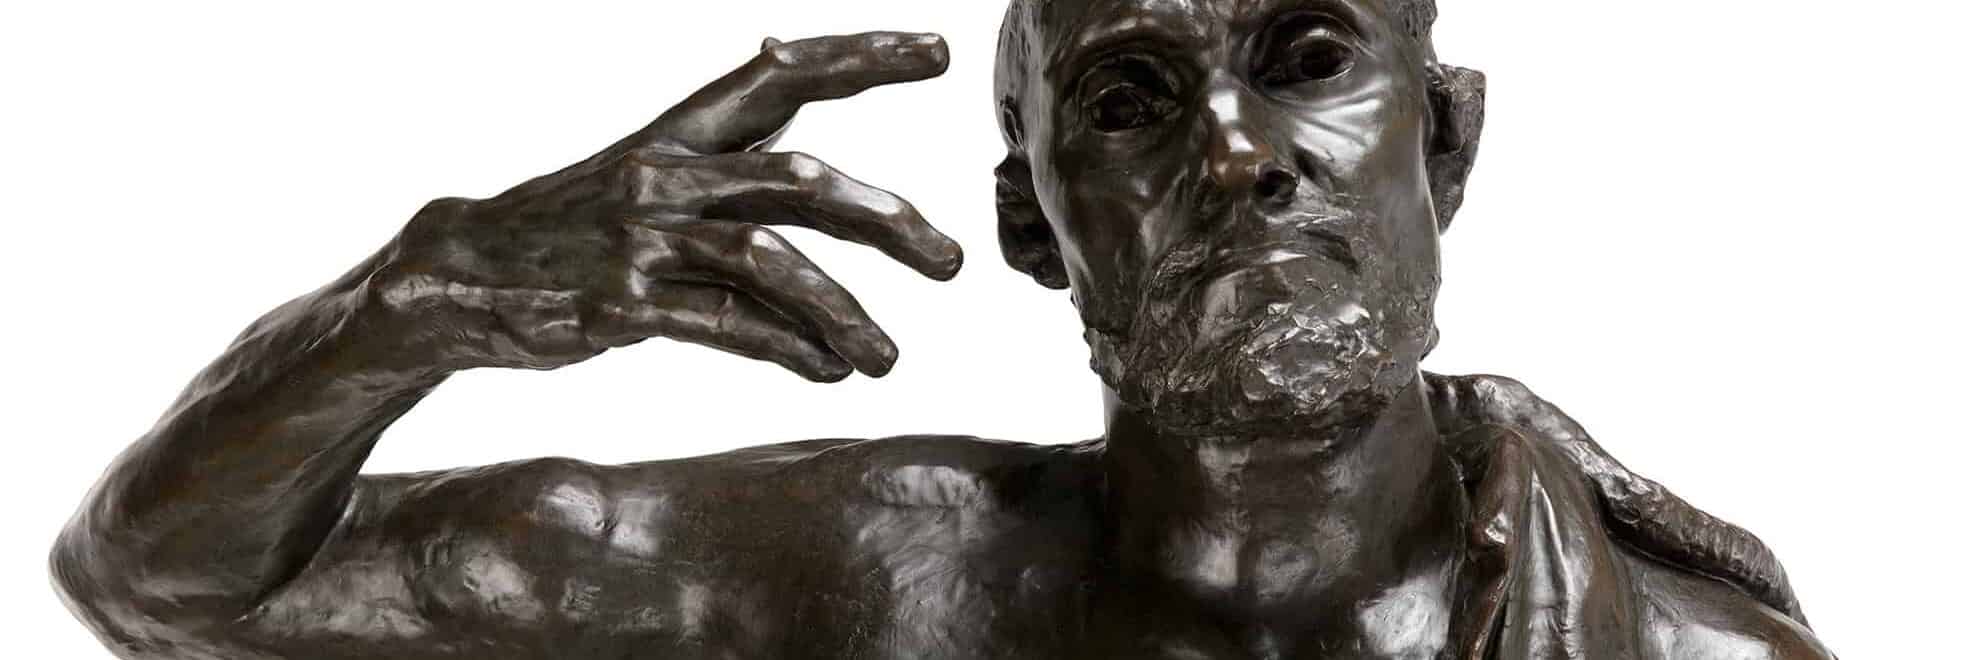 Detail of a bronze sculpture, "Jacques," by Auguste Rodin